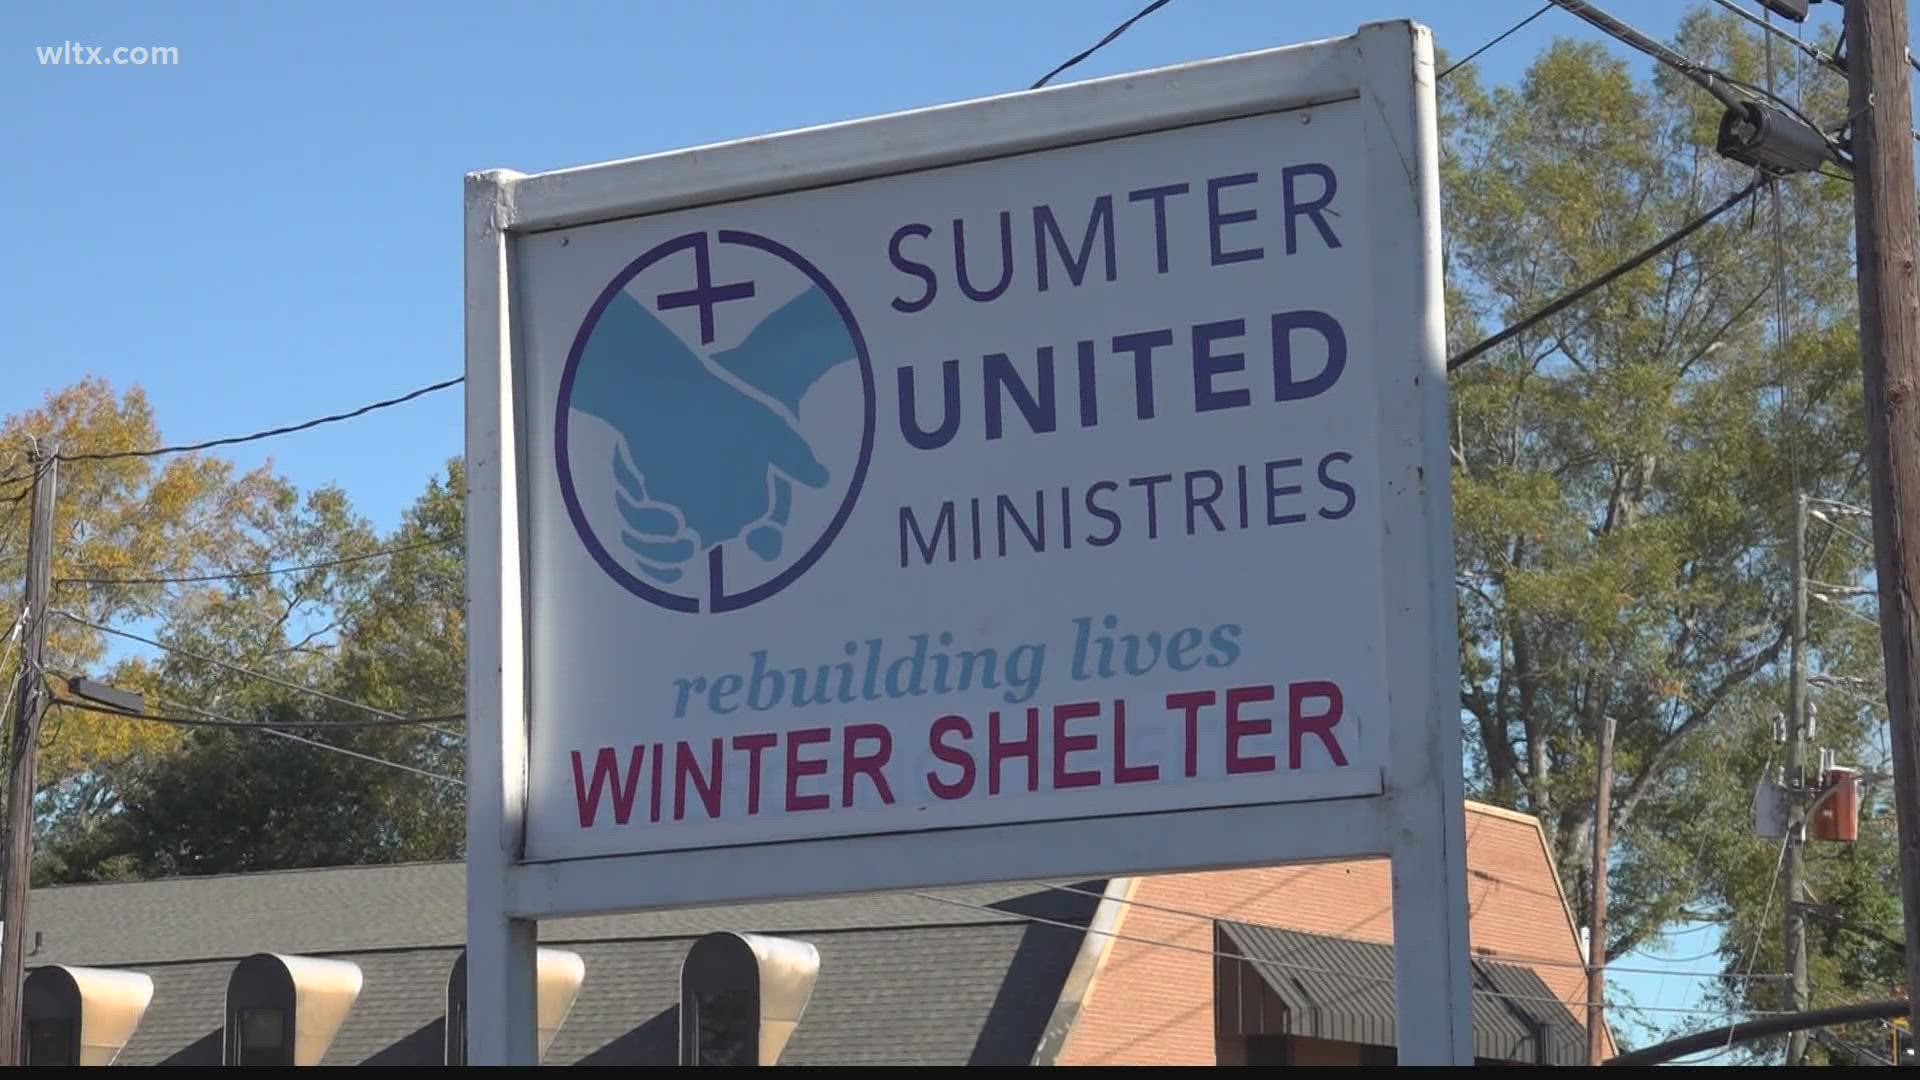 The shelter in the Church of the Holy Comforter can fit up to 25 beds. It is open from 7 a.m. to 7 p.m. when the temperature drops below 40 degrees.